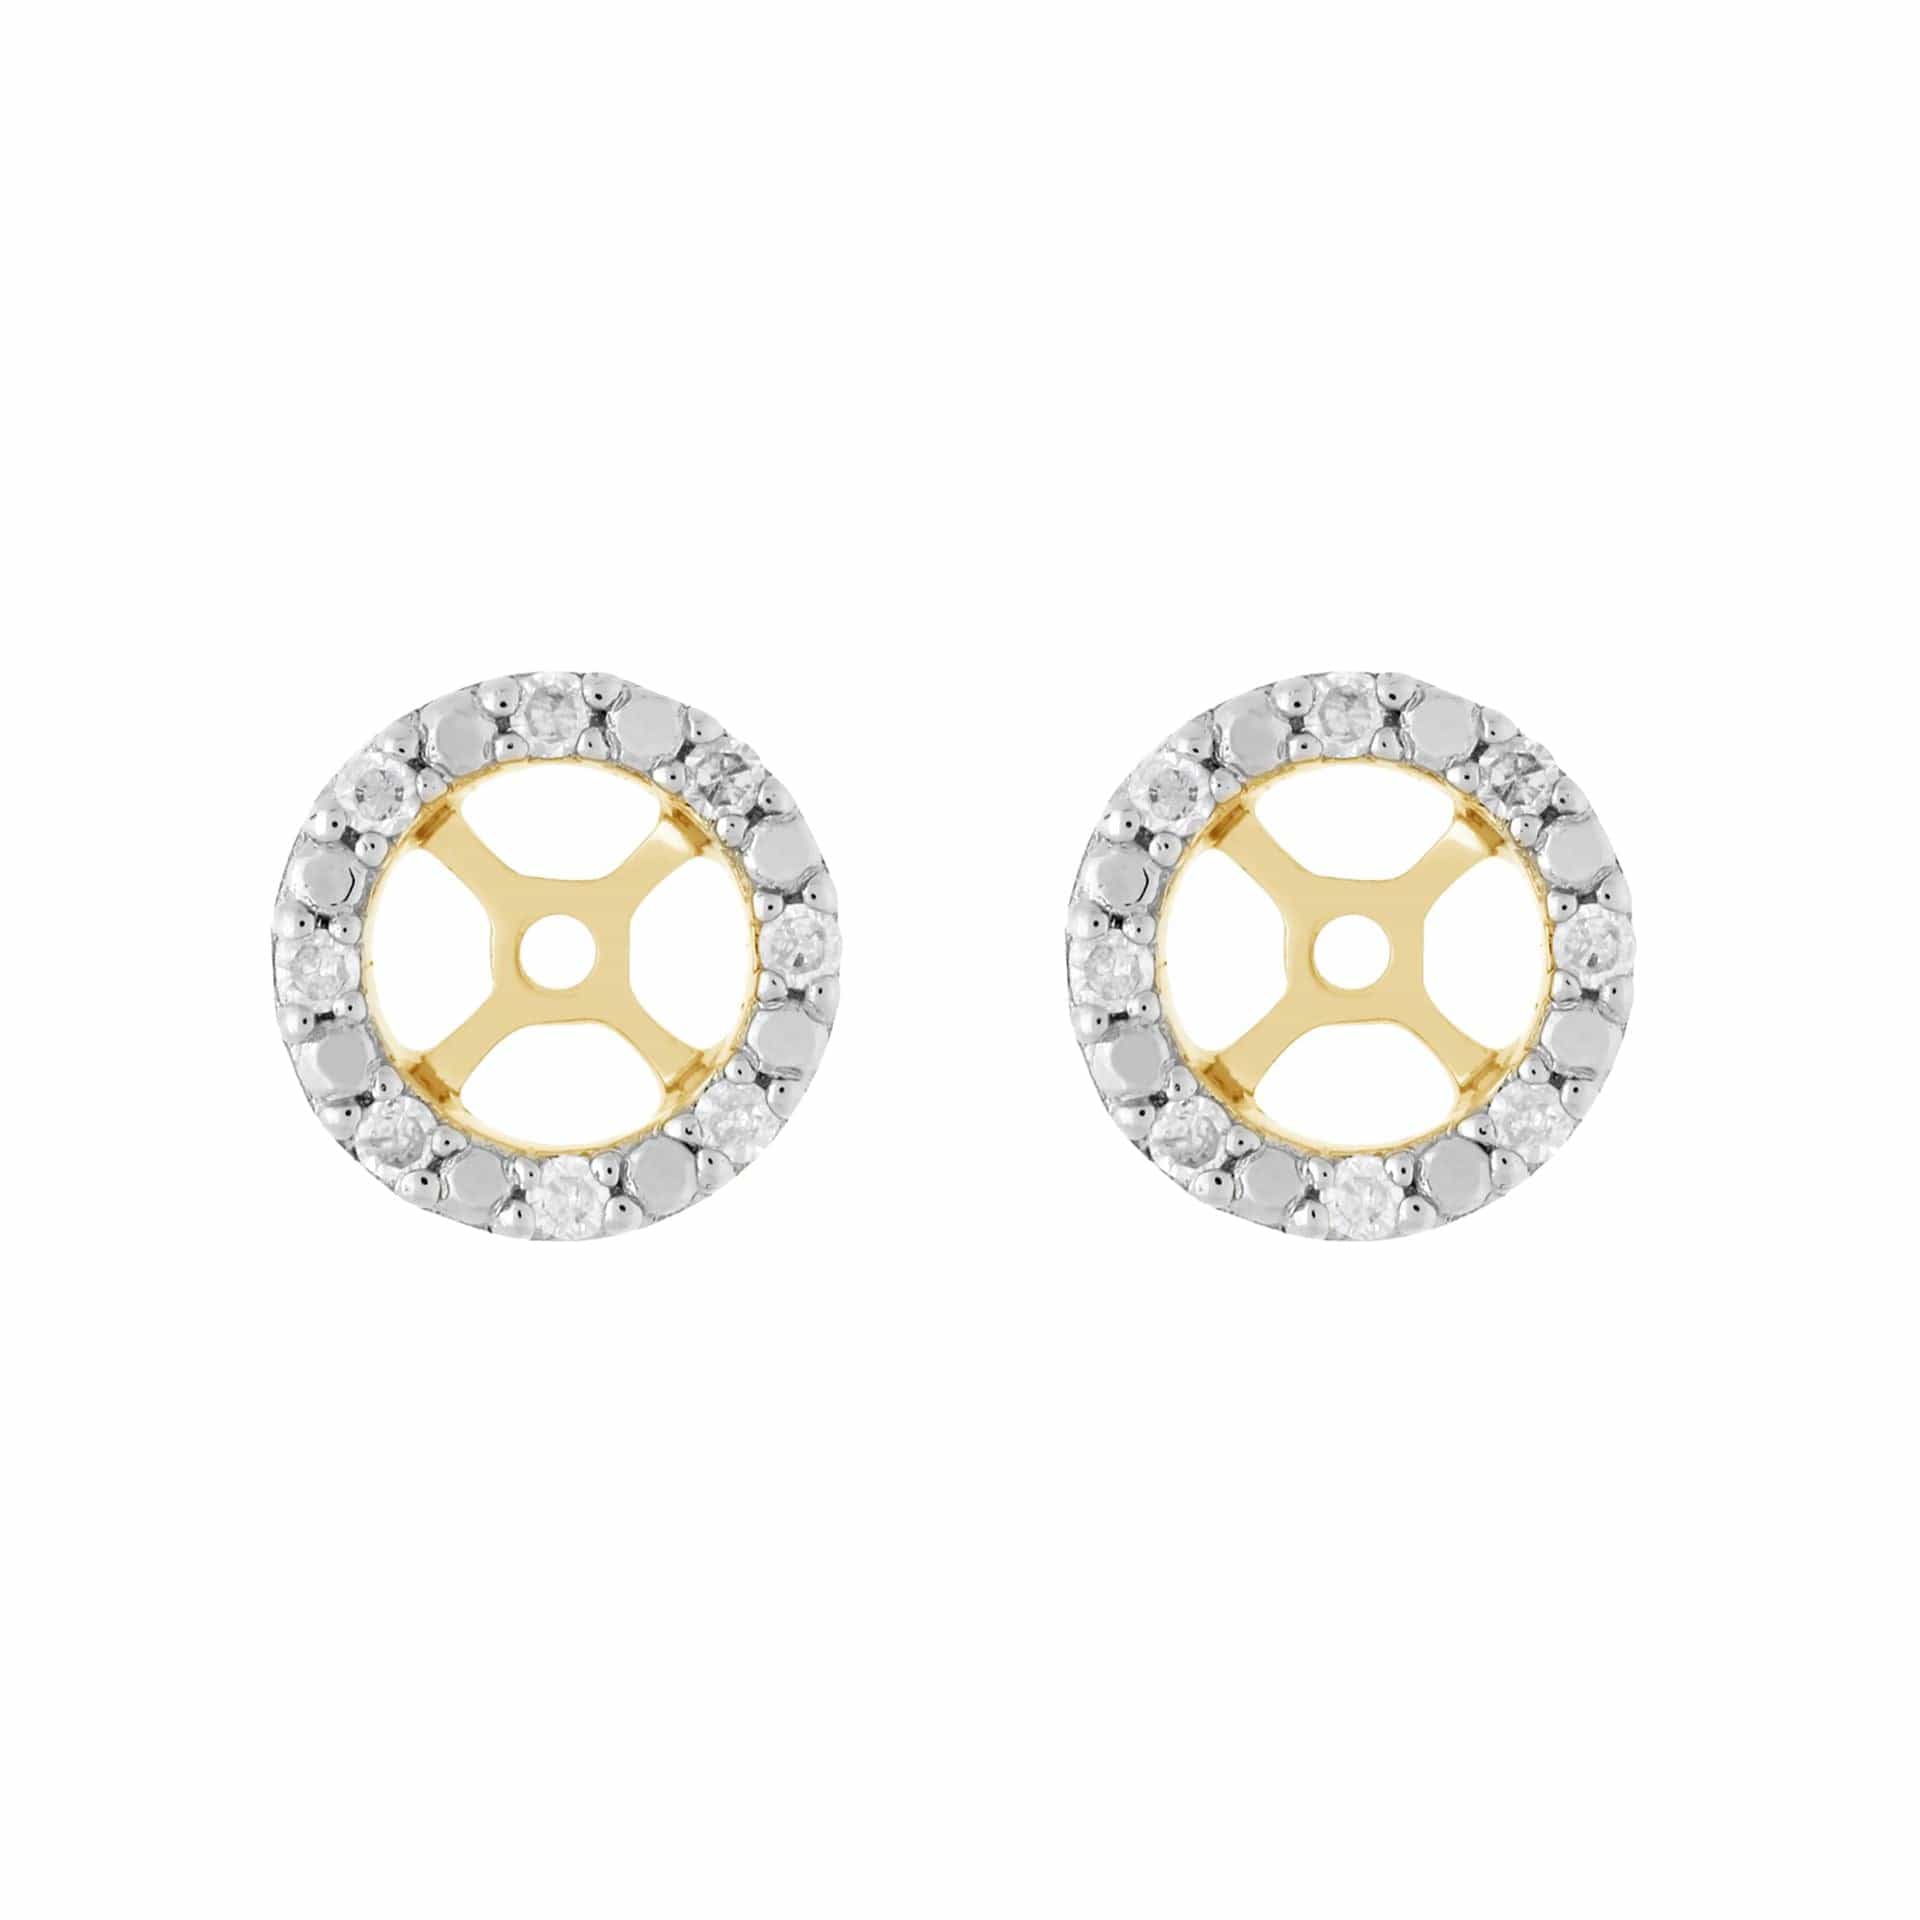 191E0376019 Classic Round Diamond Earring Jacket in 9ct Yellow Gold 1